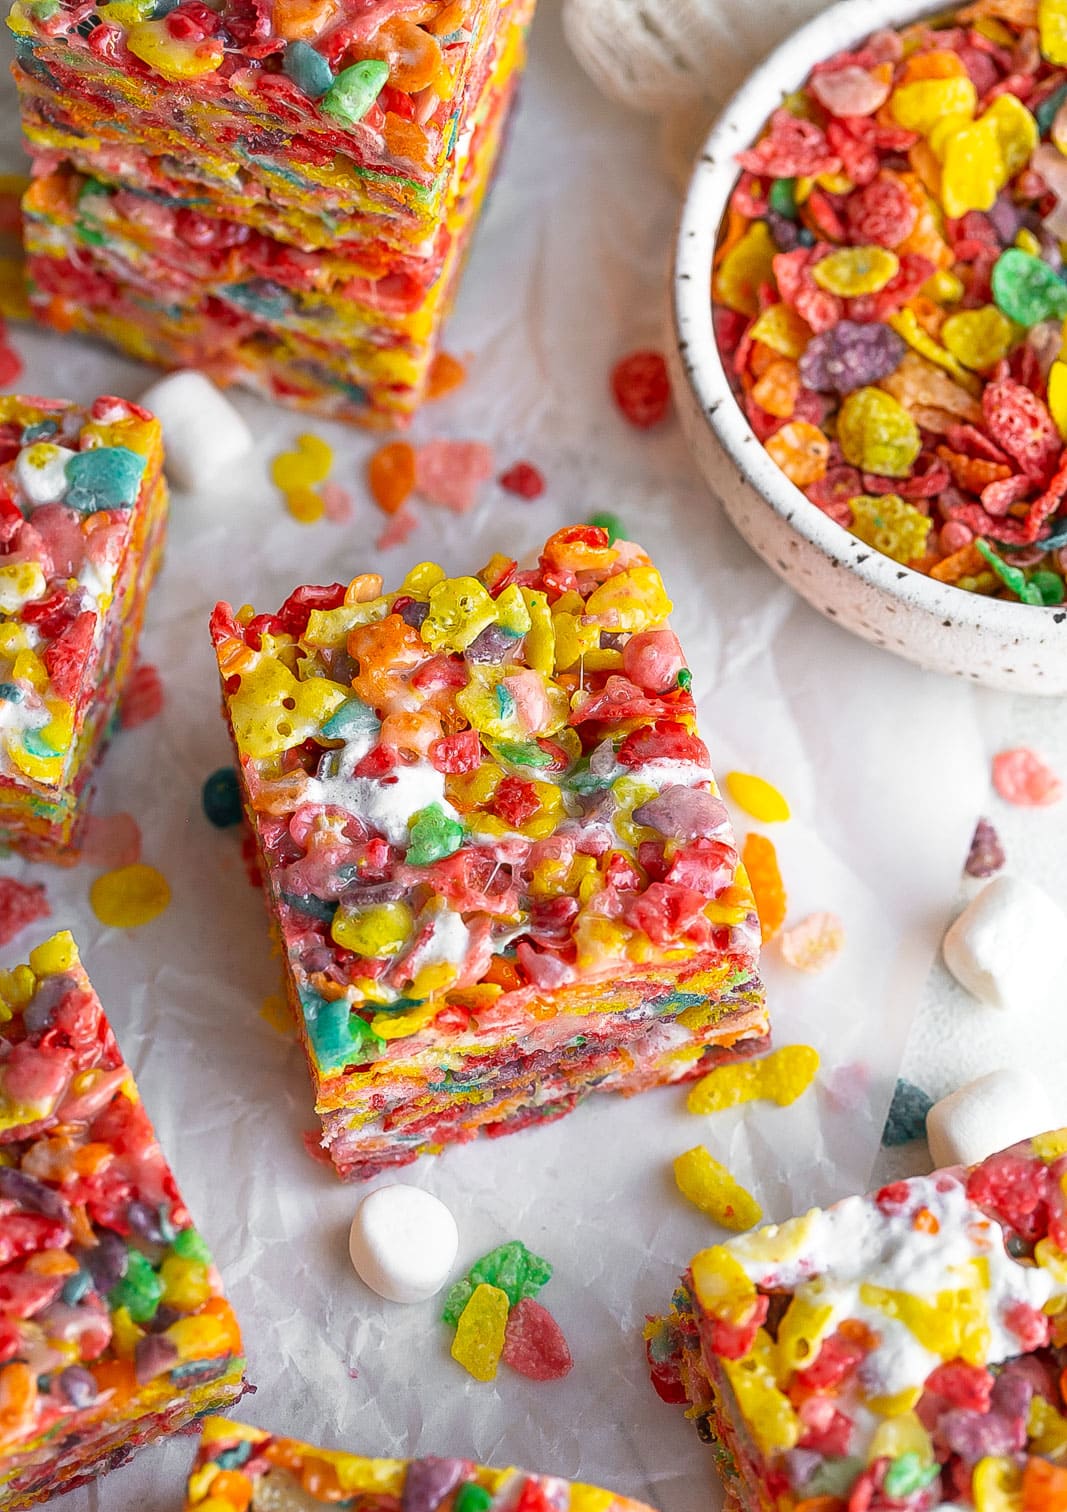 Marshmallow treat with fruity pebbles cereal.